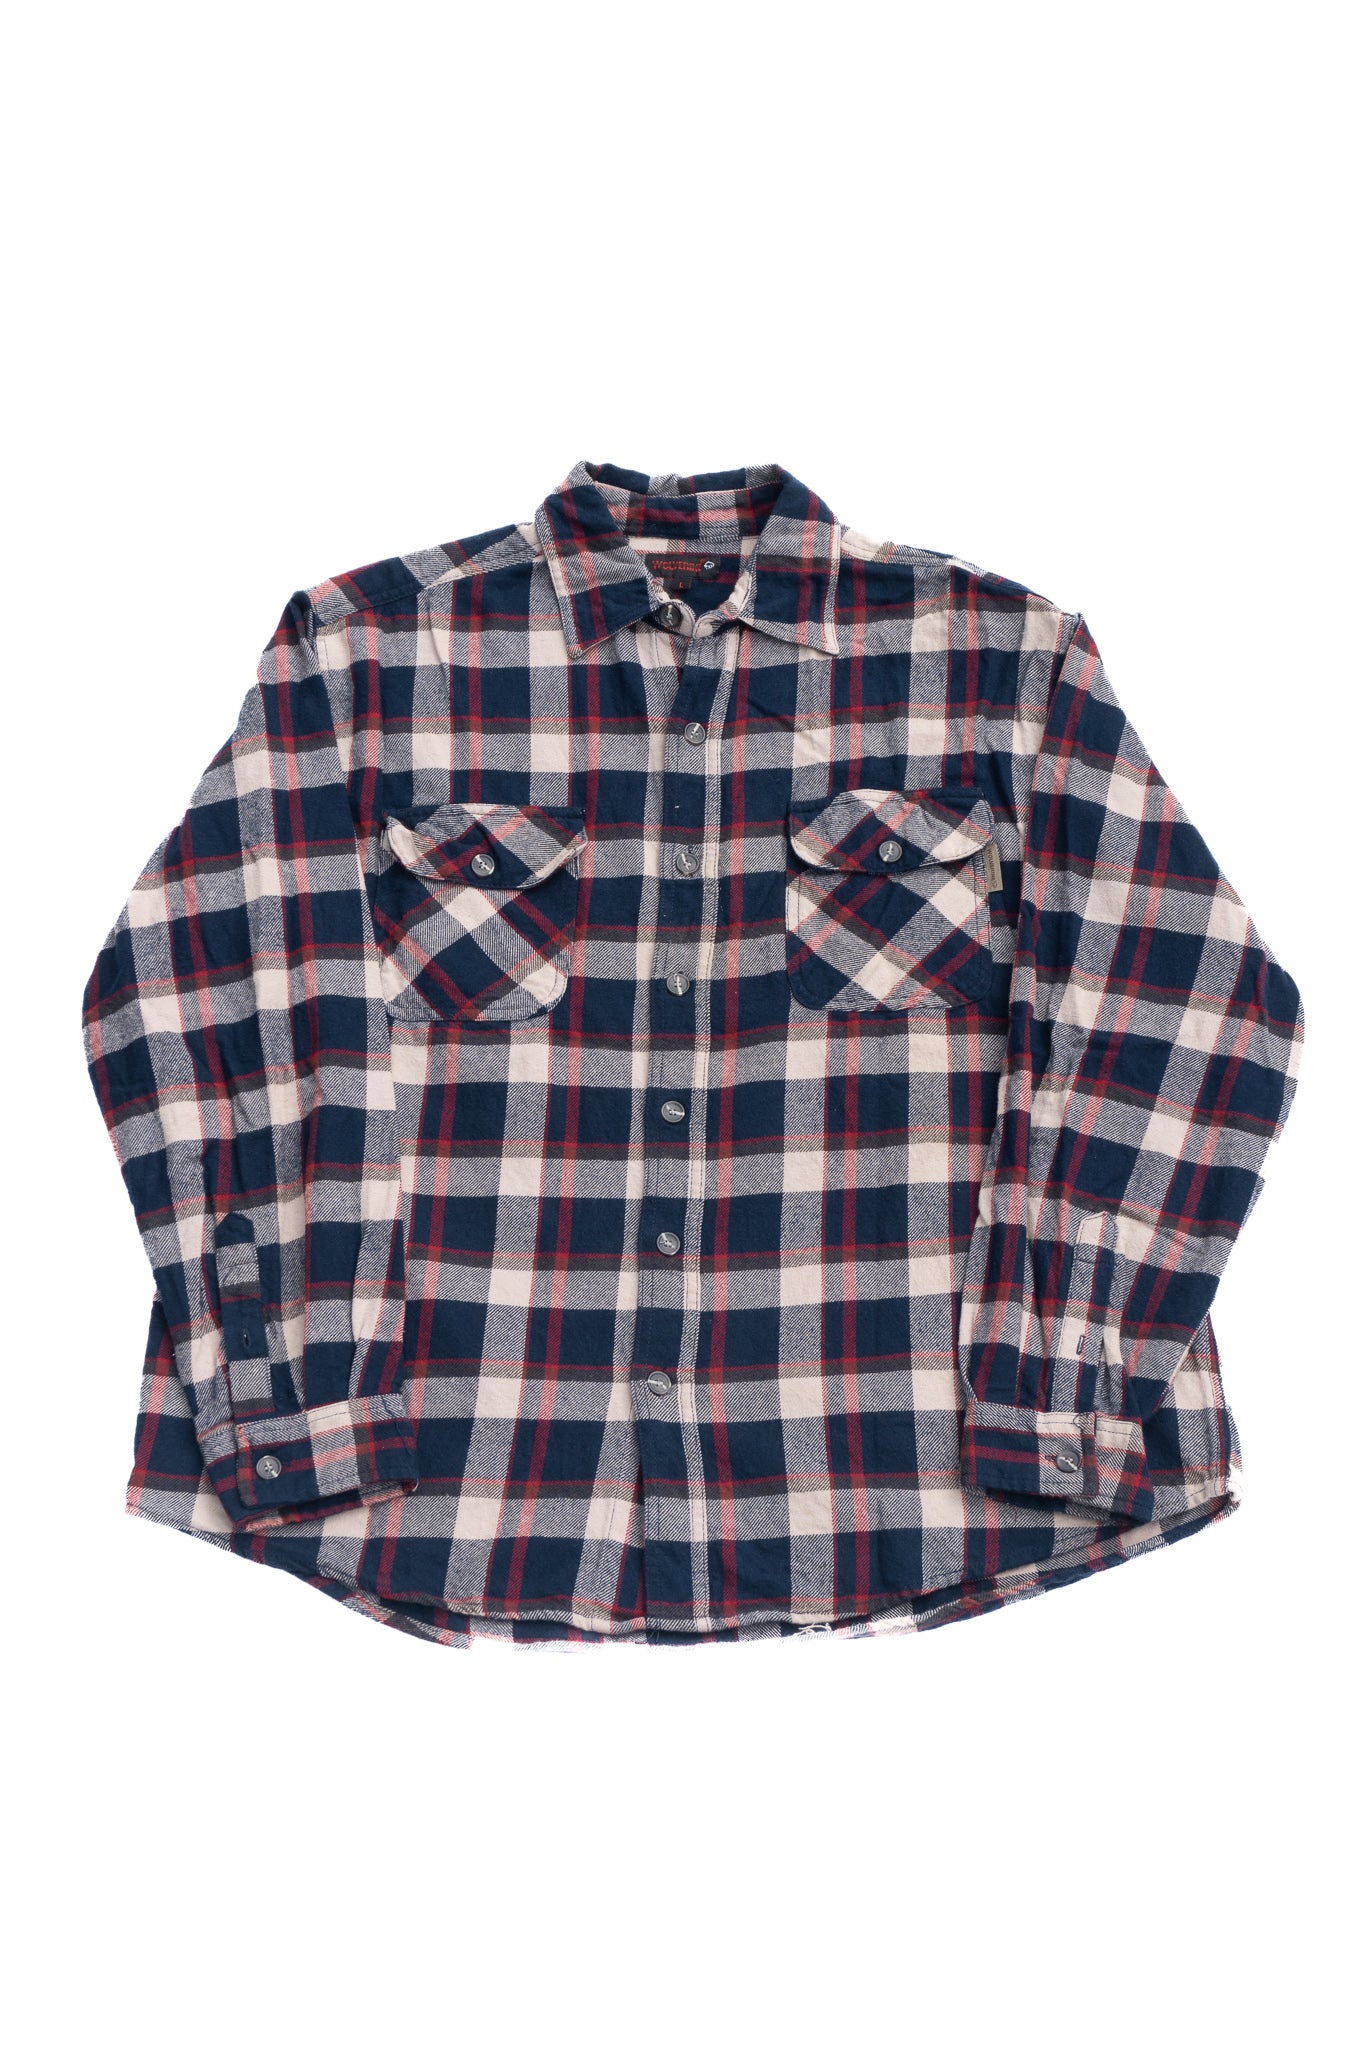 Wolverine Long Sleeve Checked Shirt